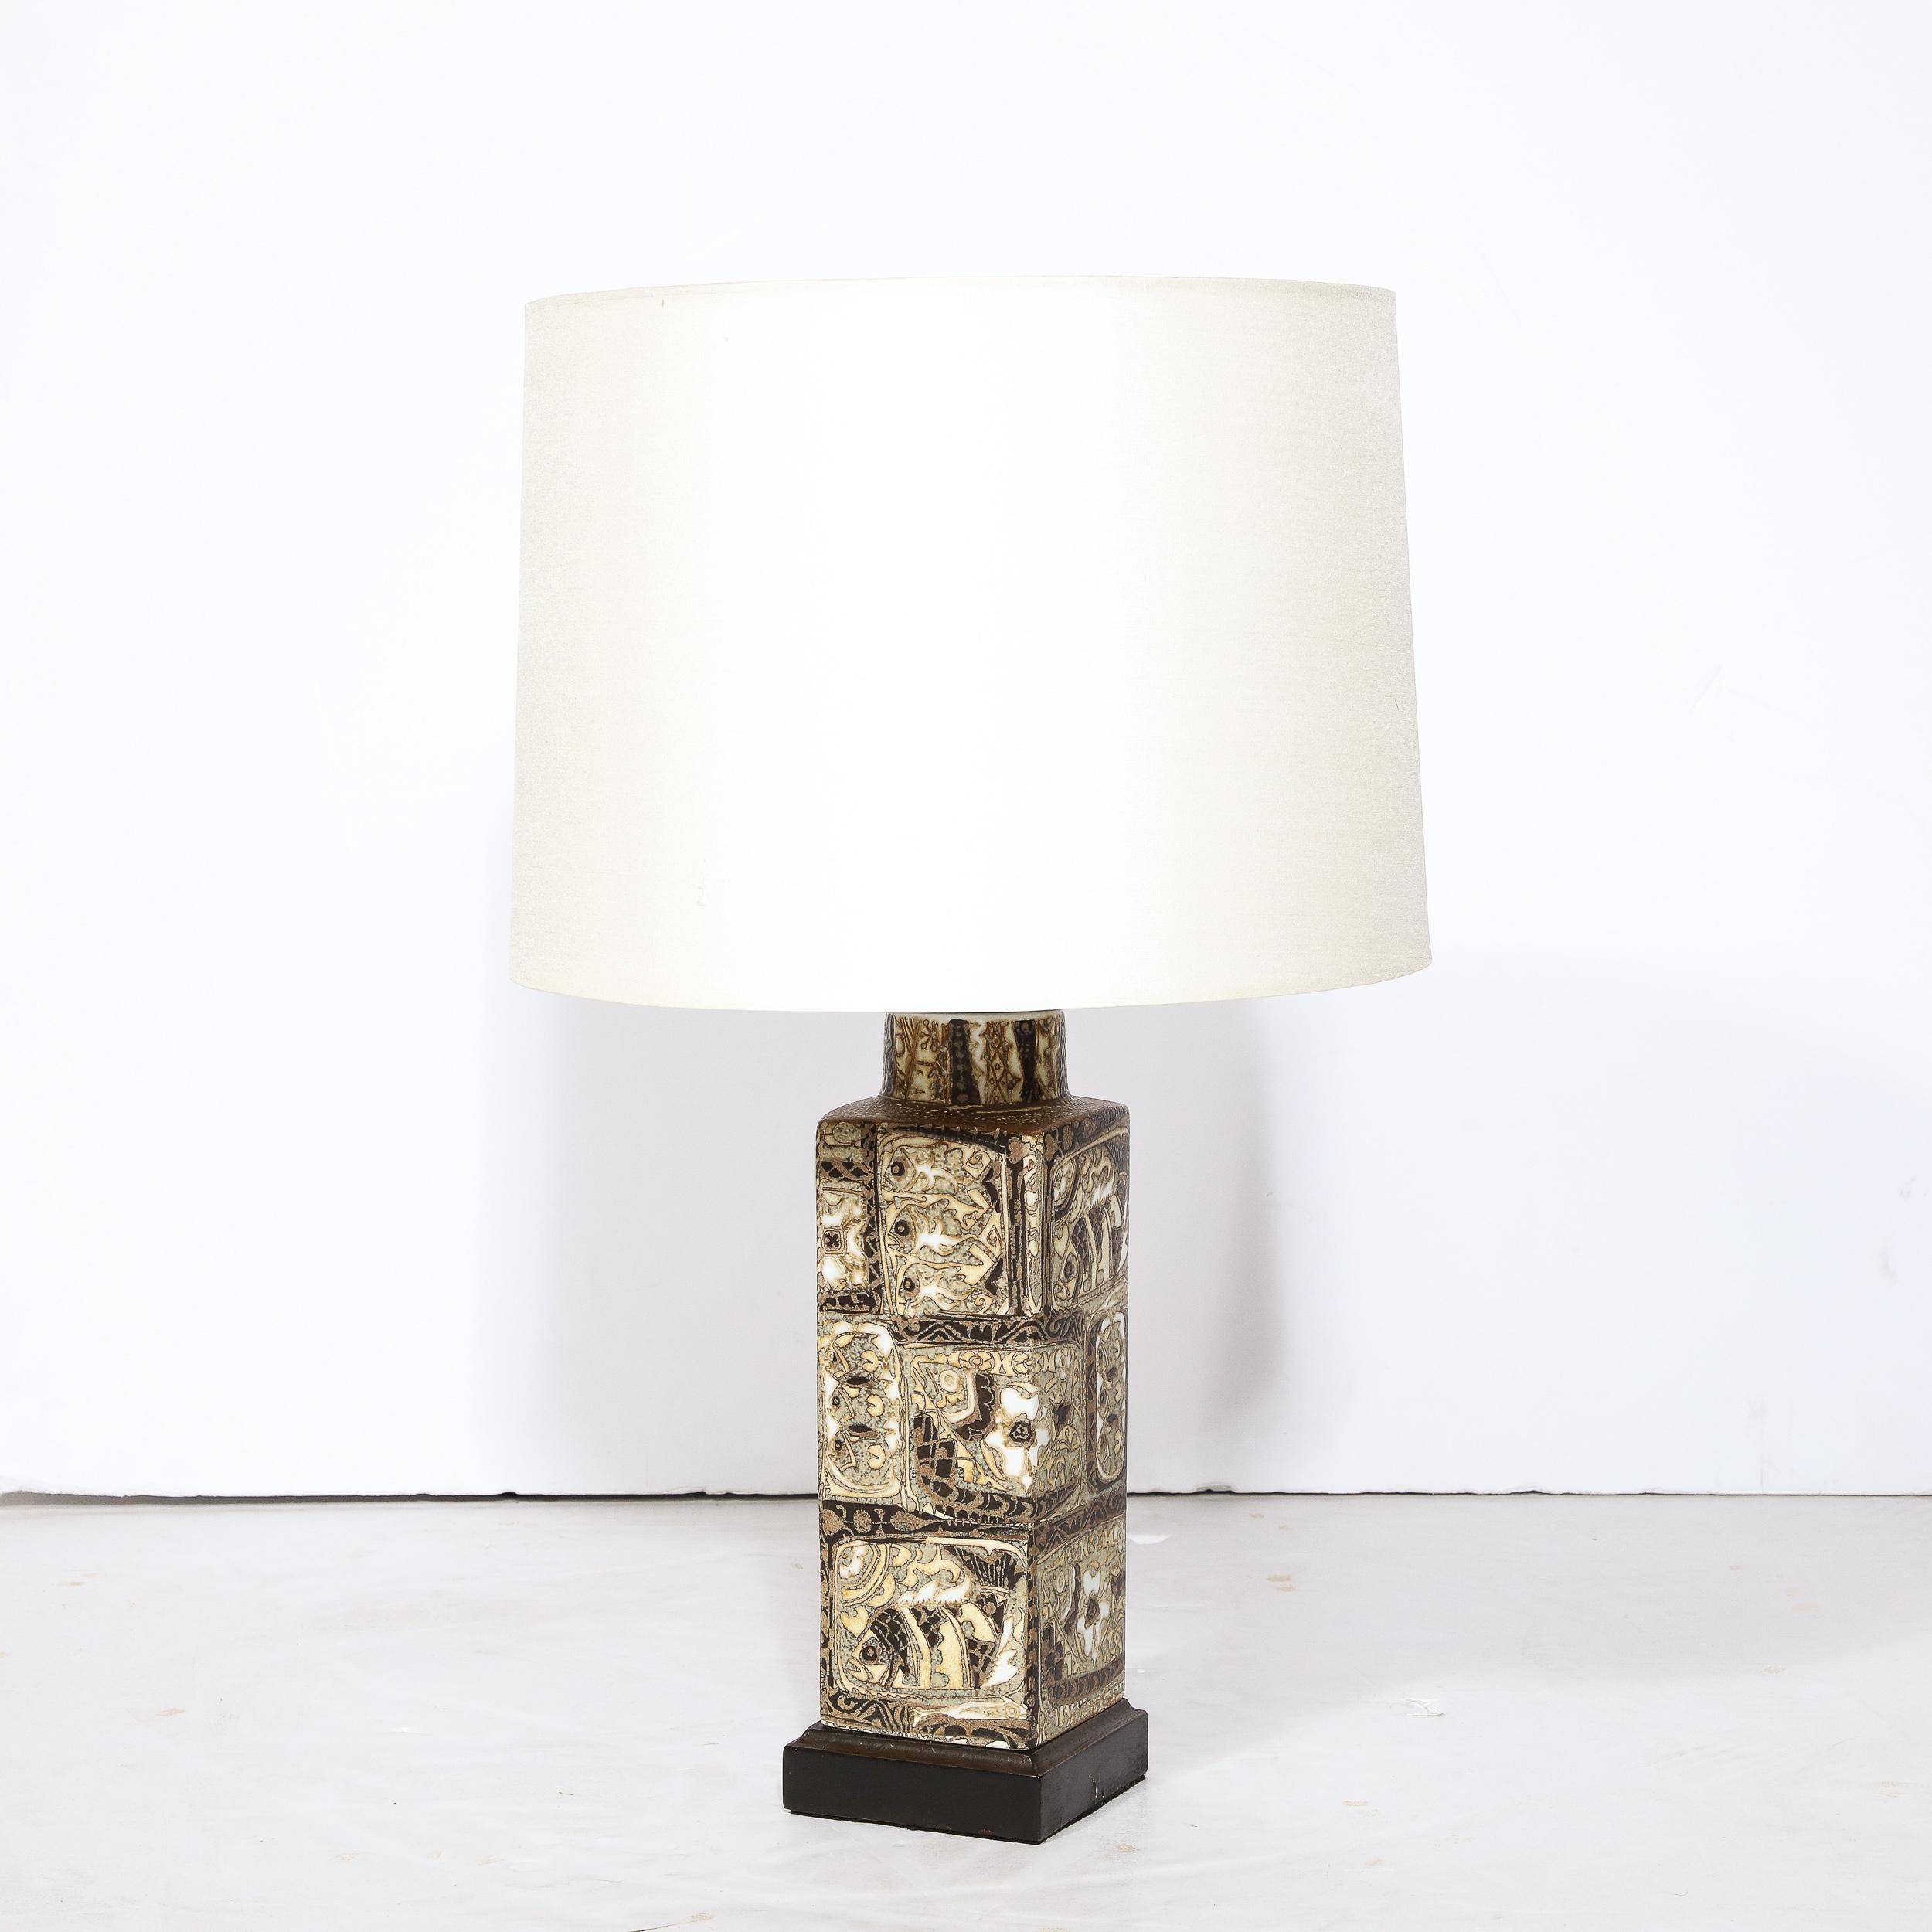 Danish Hand Painted Ceramic Table Lamp with Oceanic Motifs by Royal Copenhagen